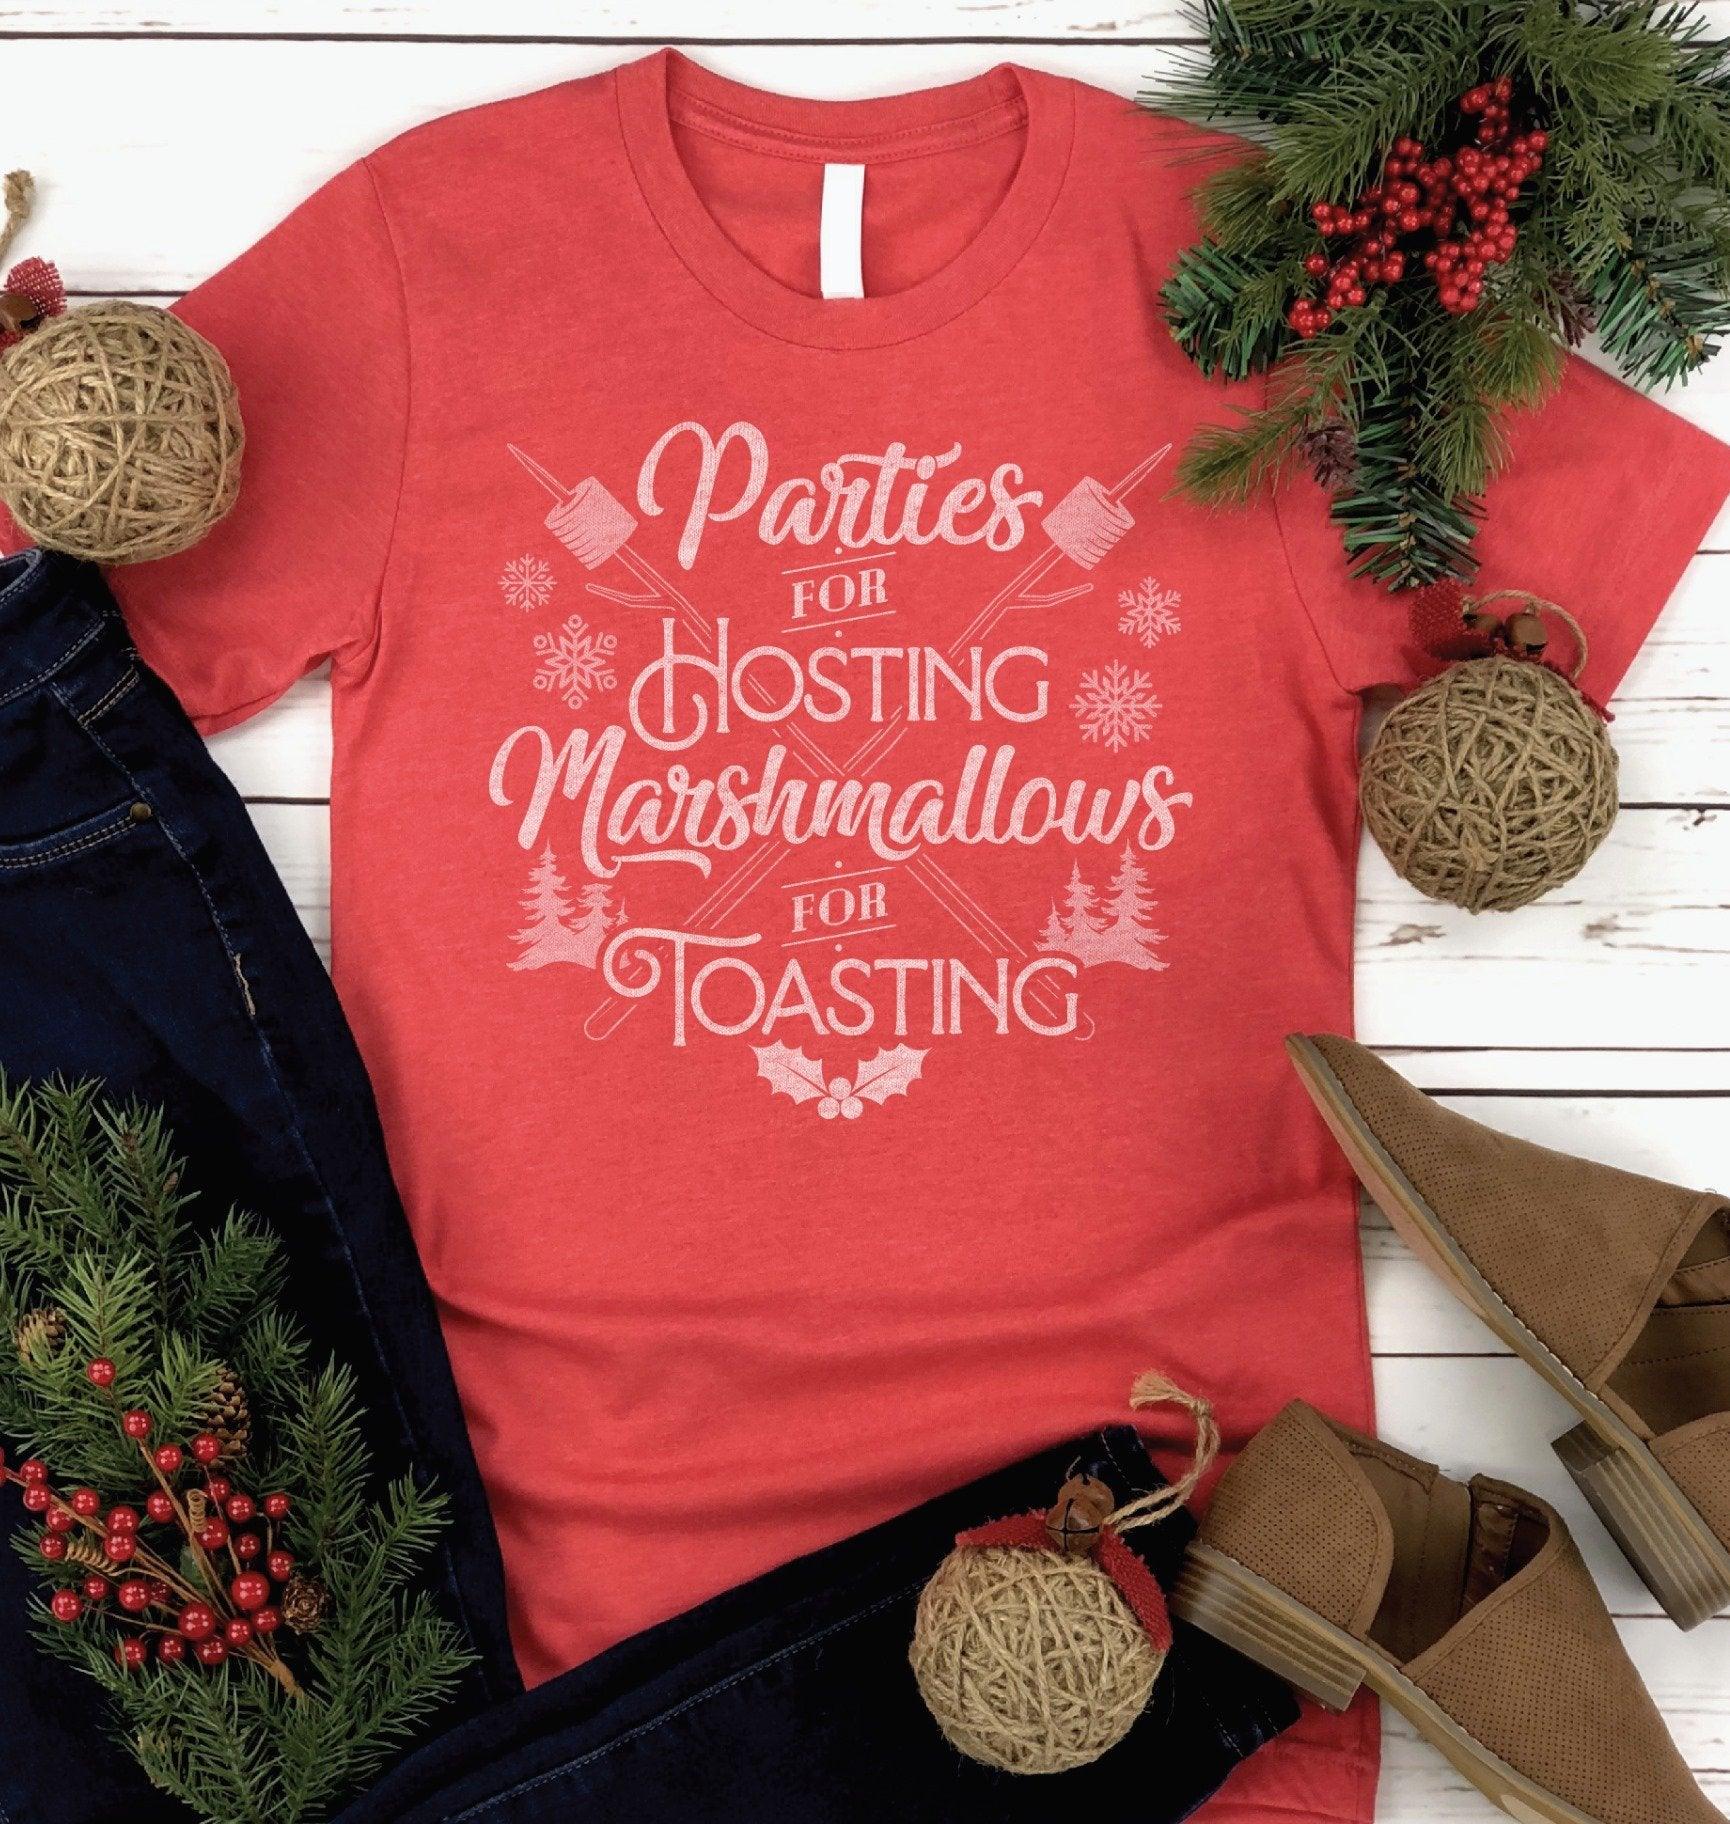 Parties for Hosting Marshmallows for Toasting 🎄🎼 - Signastyle Boutique